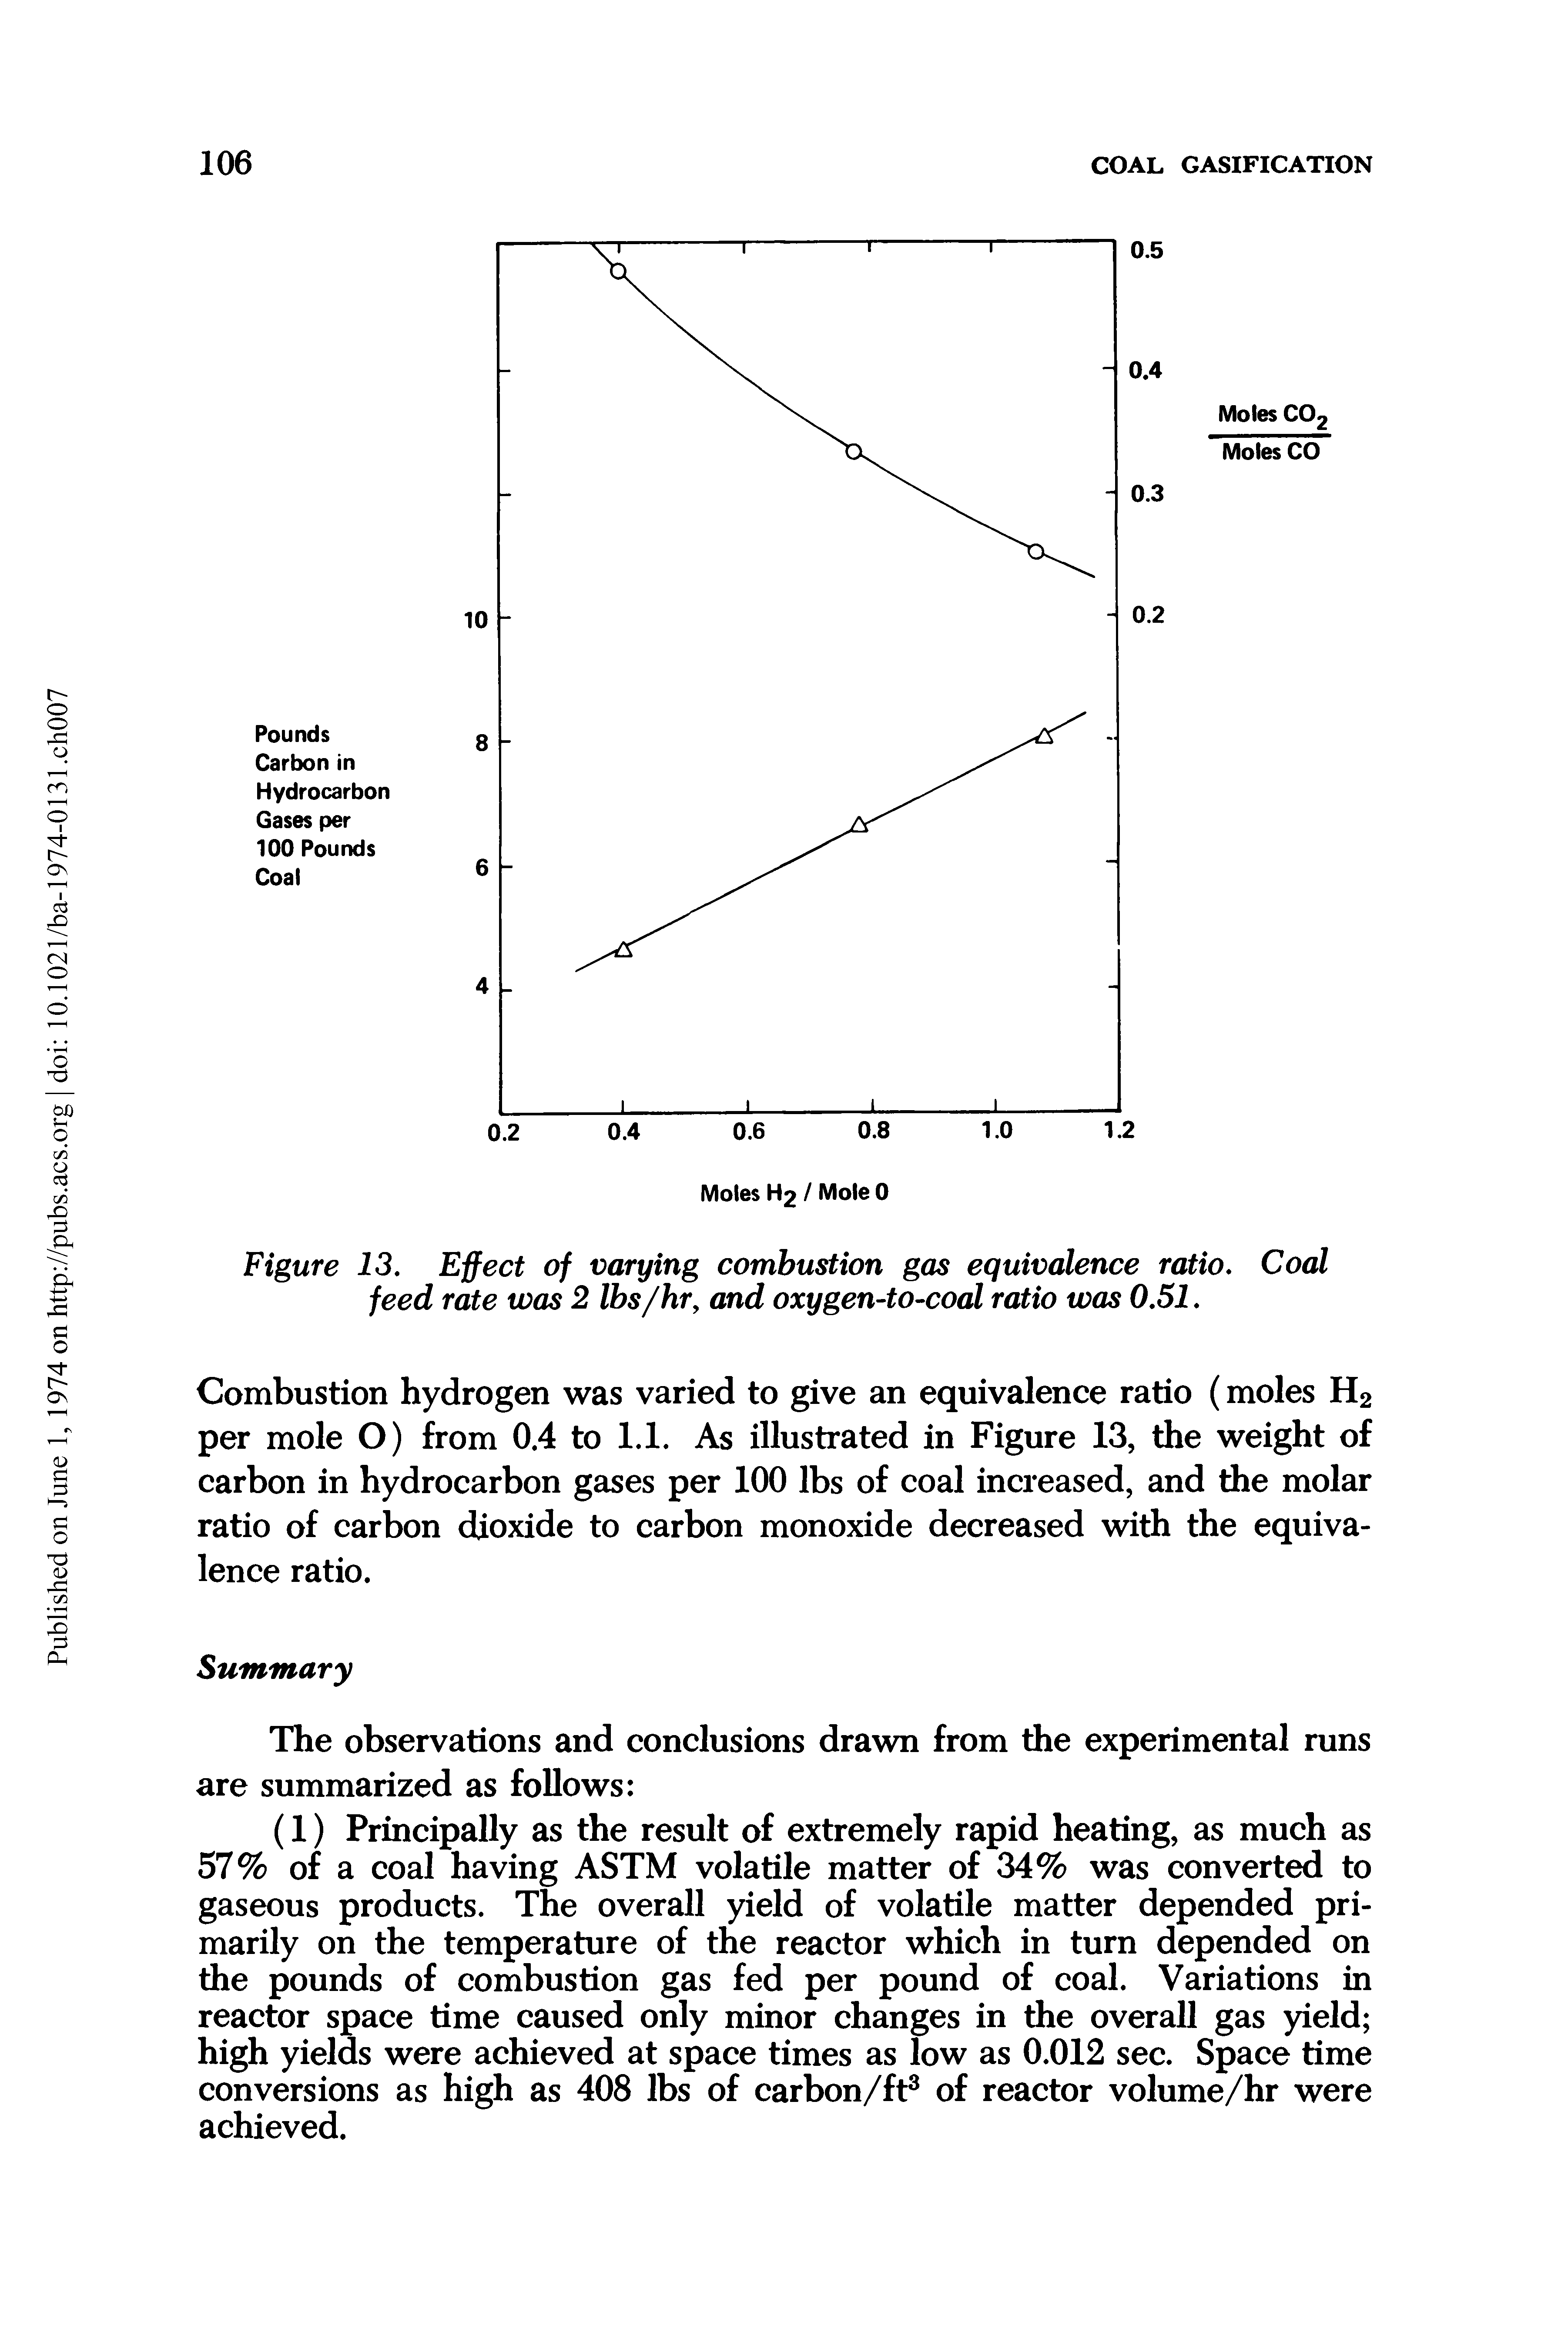 Figure 13. Effect of varying combustion gas equivalence ratio. Coal feed rate was 2 lbs/hr, and oxygen-to-coal ratio was 0.51.